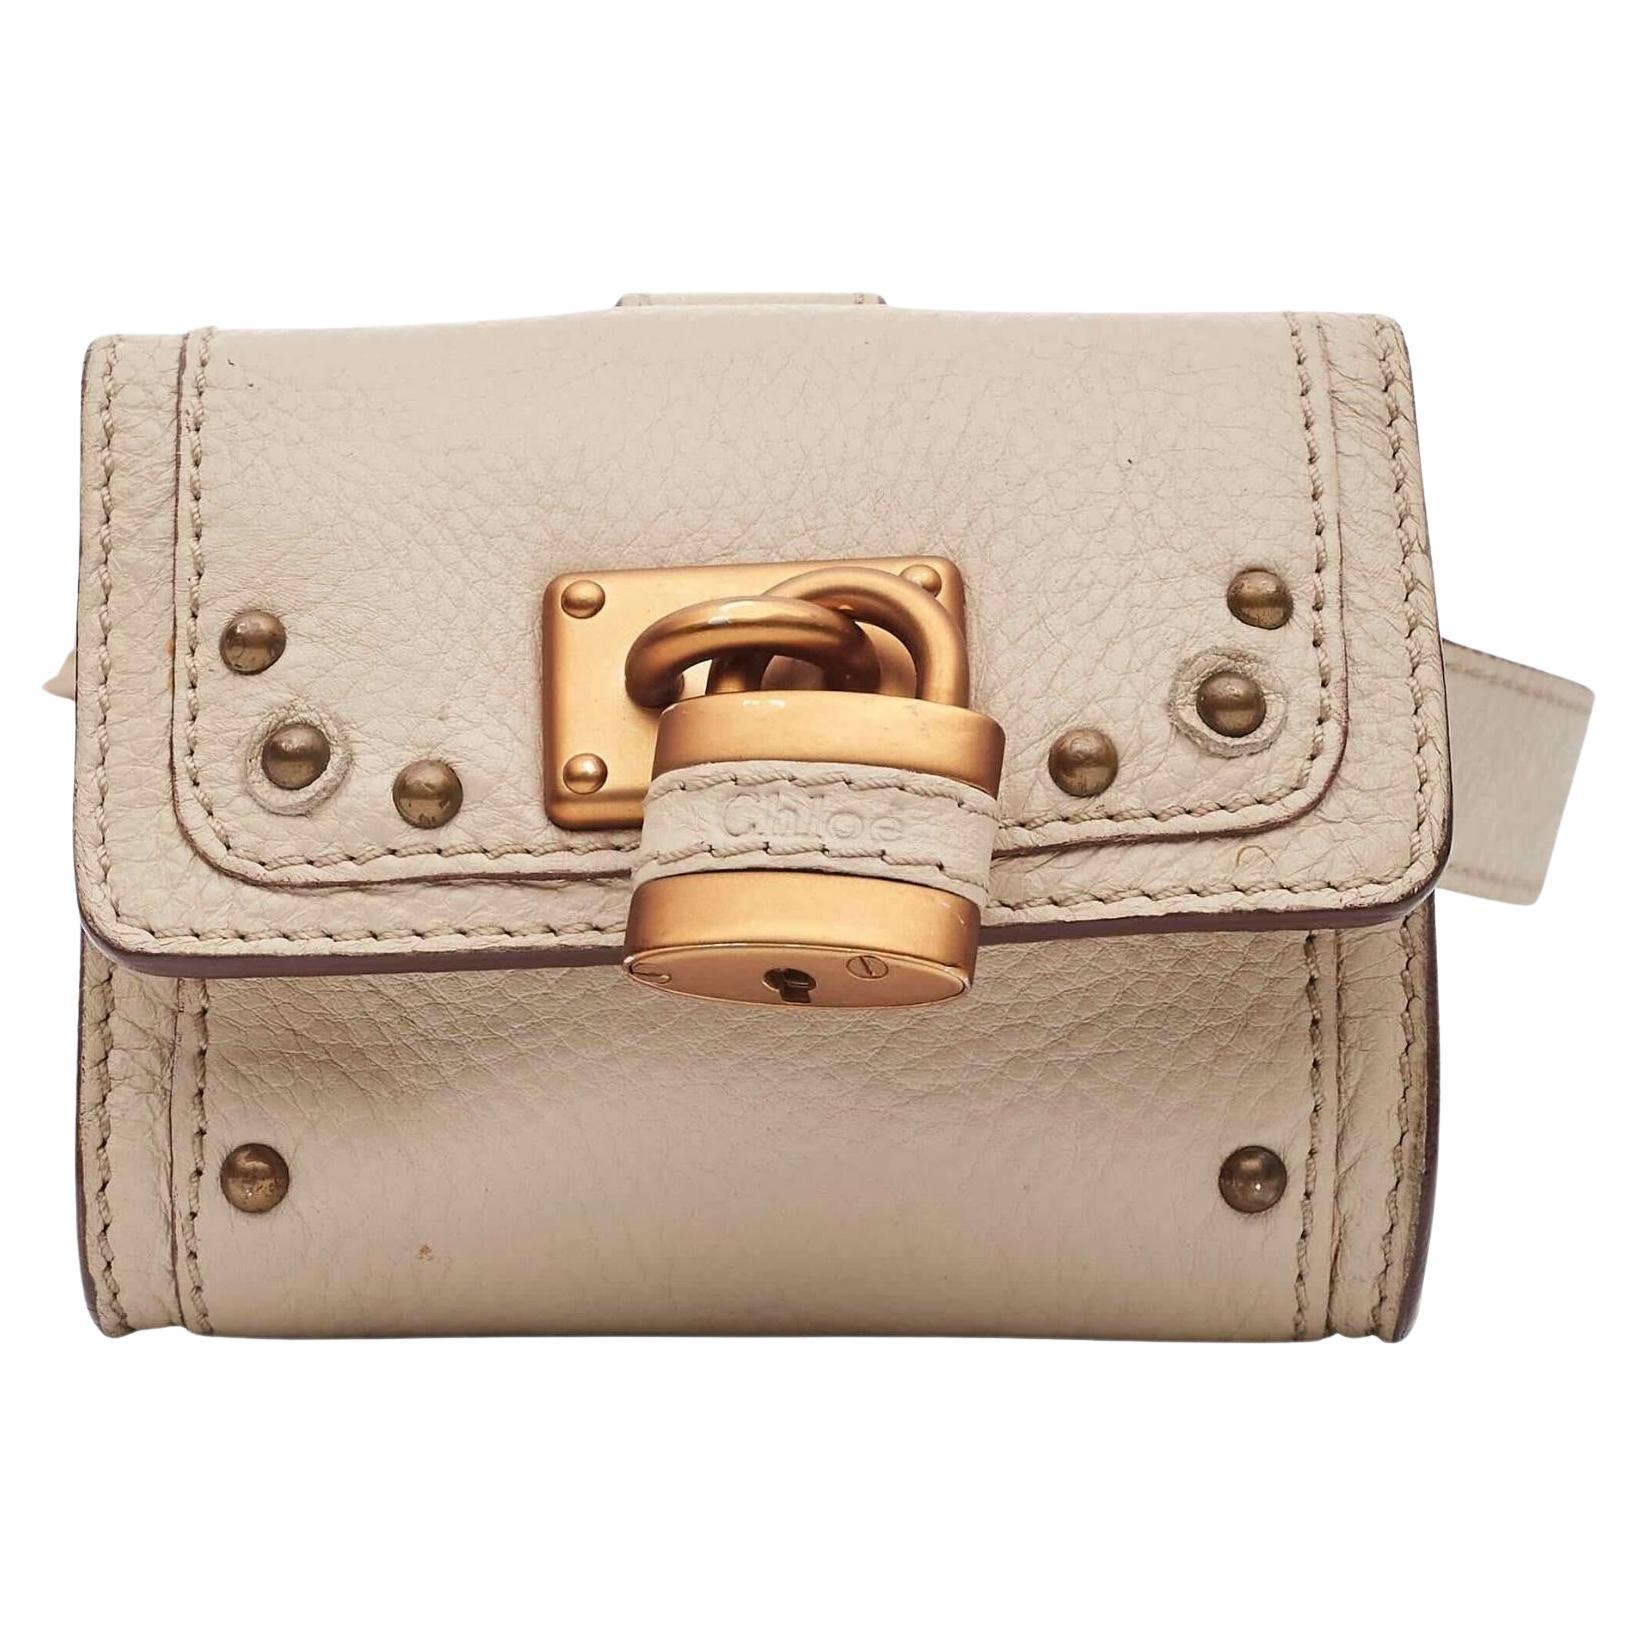 Chloe Leather Mini Belt Bag With Lock For Sale